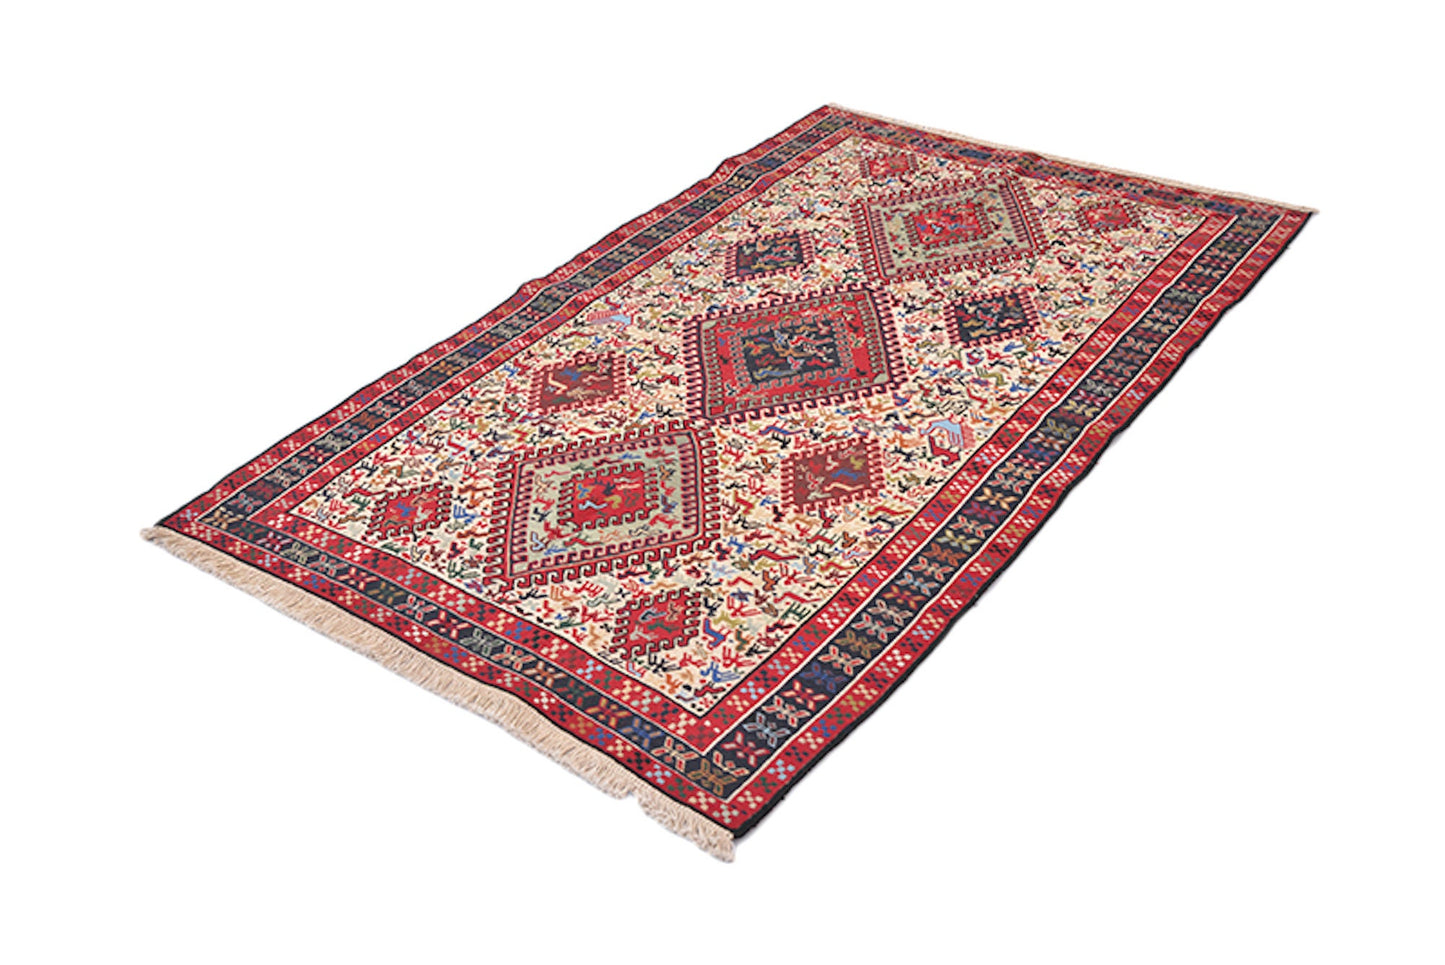 4 x 6 Kilim Flatweave Vintage Area Rug | Turkish Colorful Hand Woven Area Rug with Diamond Pattern and Bright Red Accent Color